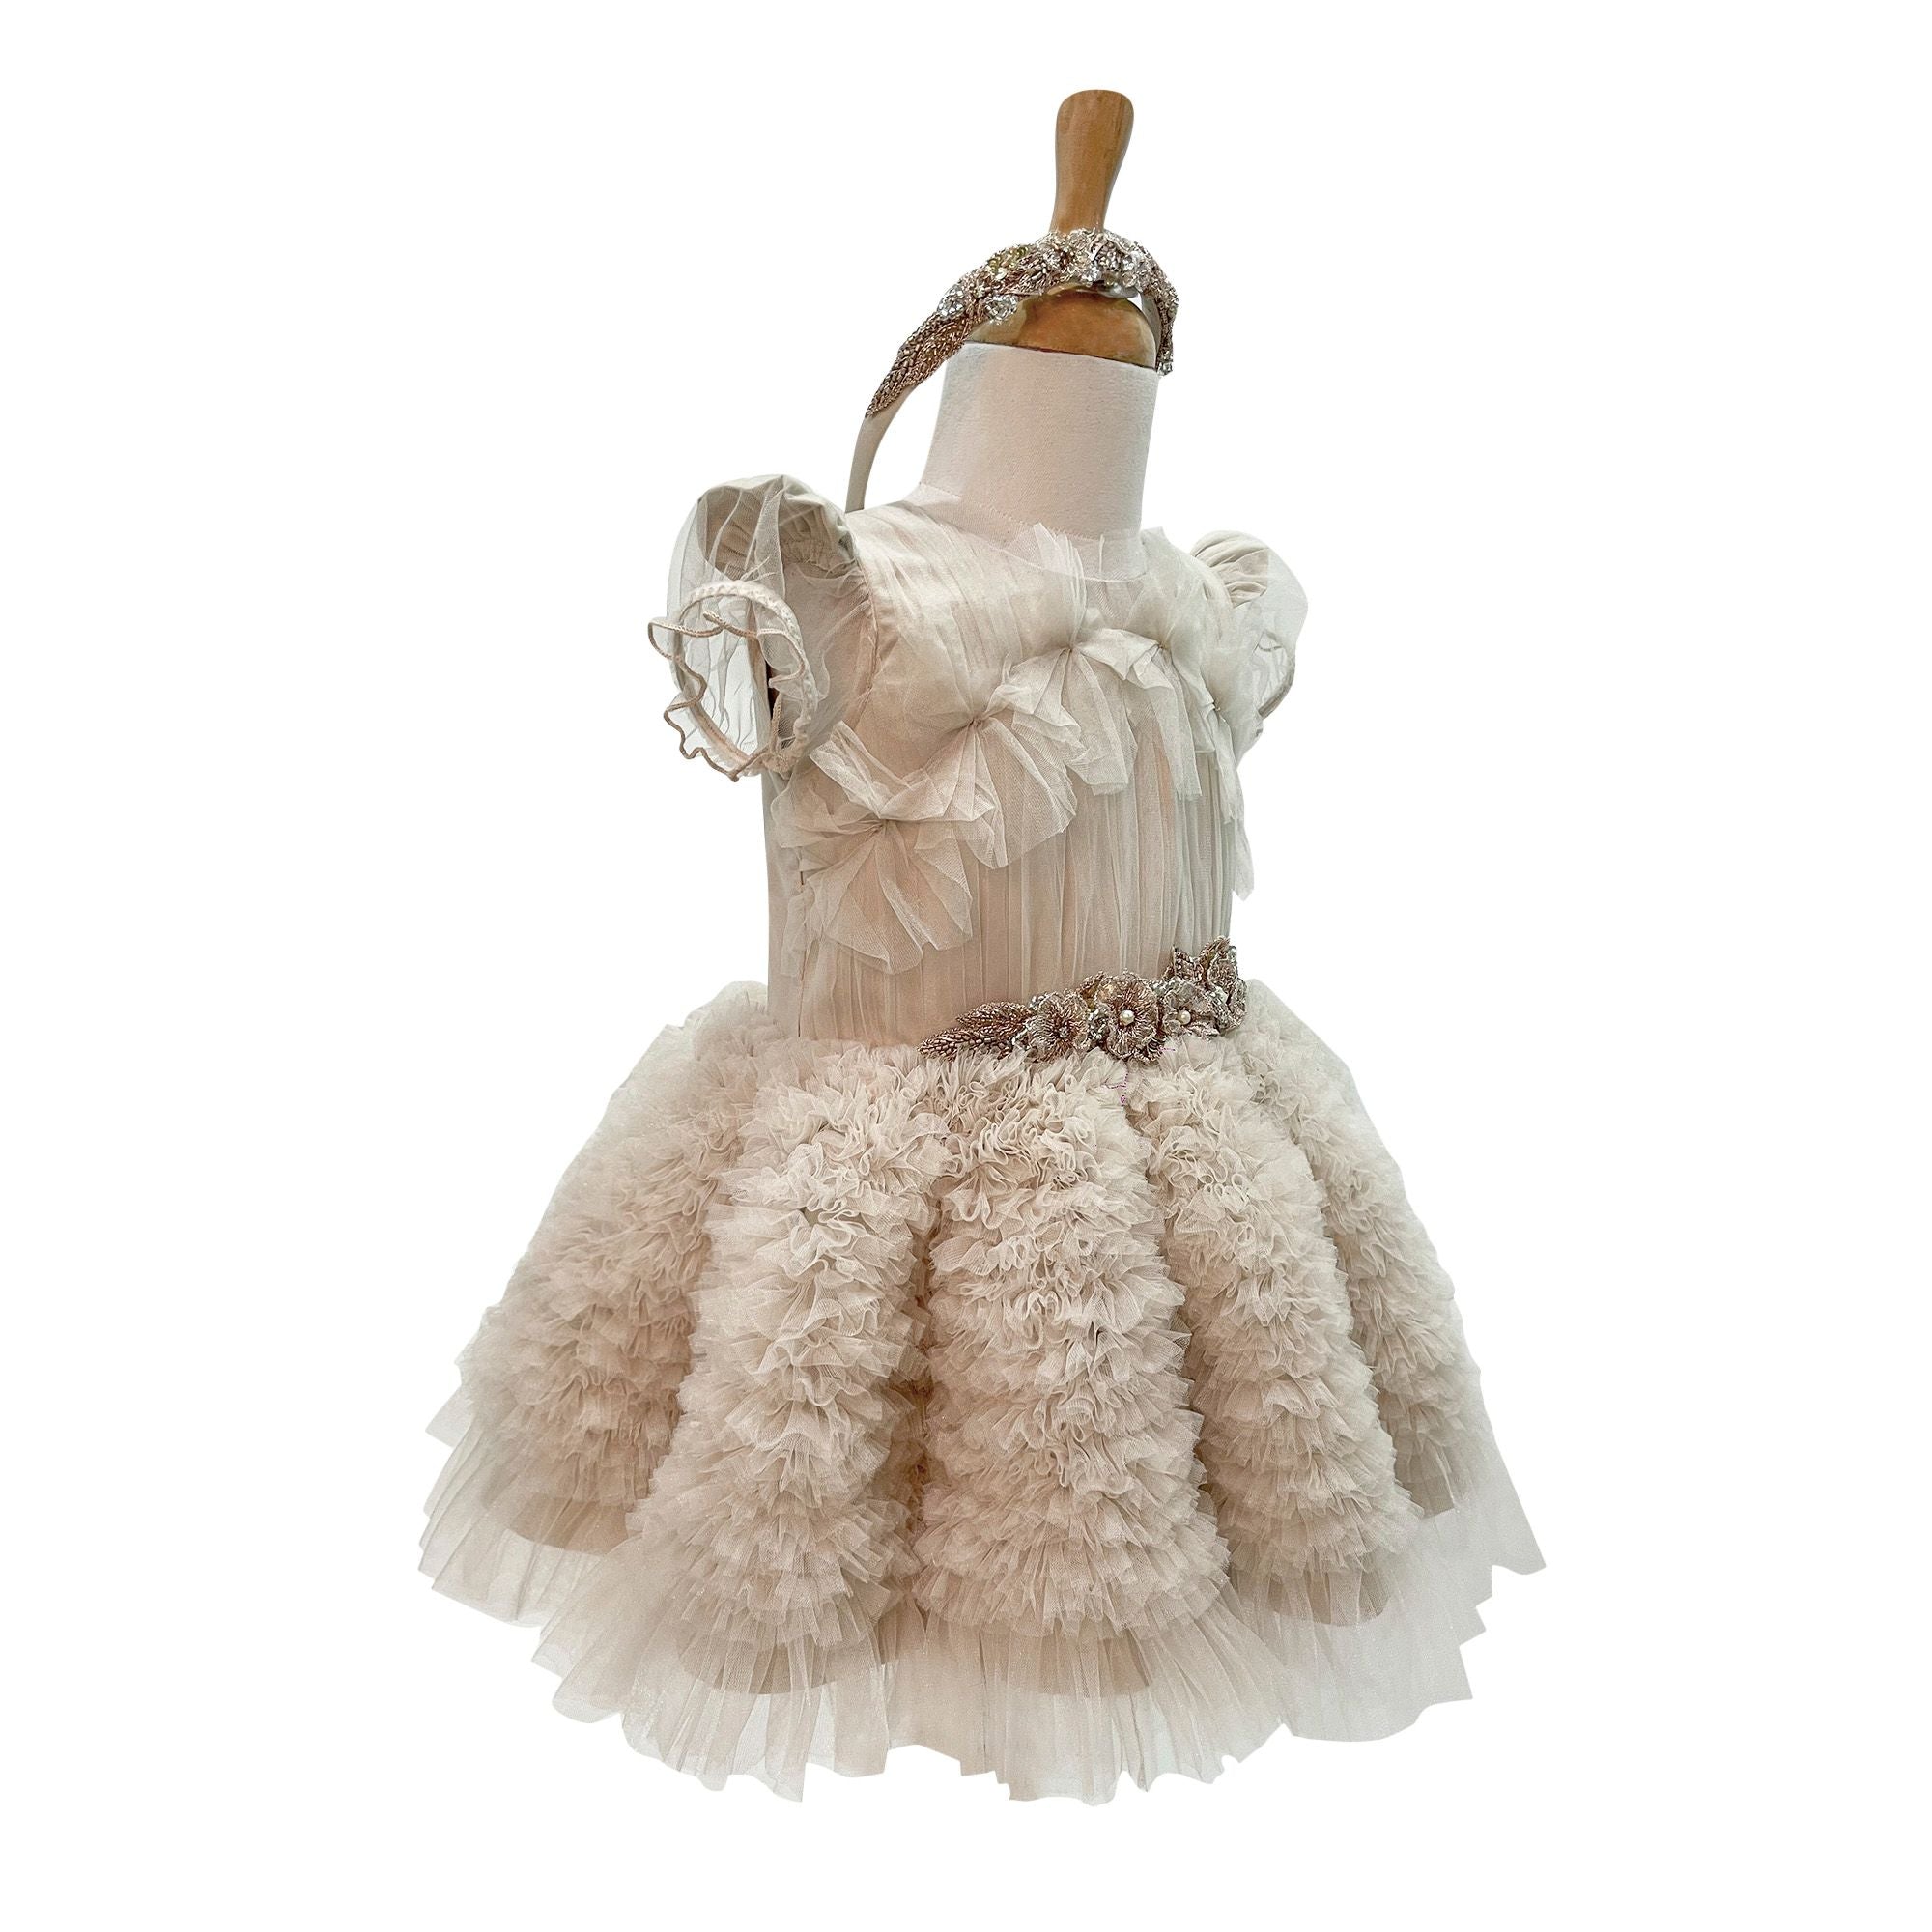 The Embellished Ariel Tulle Dress with Sleeves (Peach)